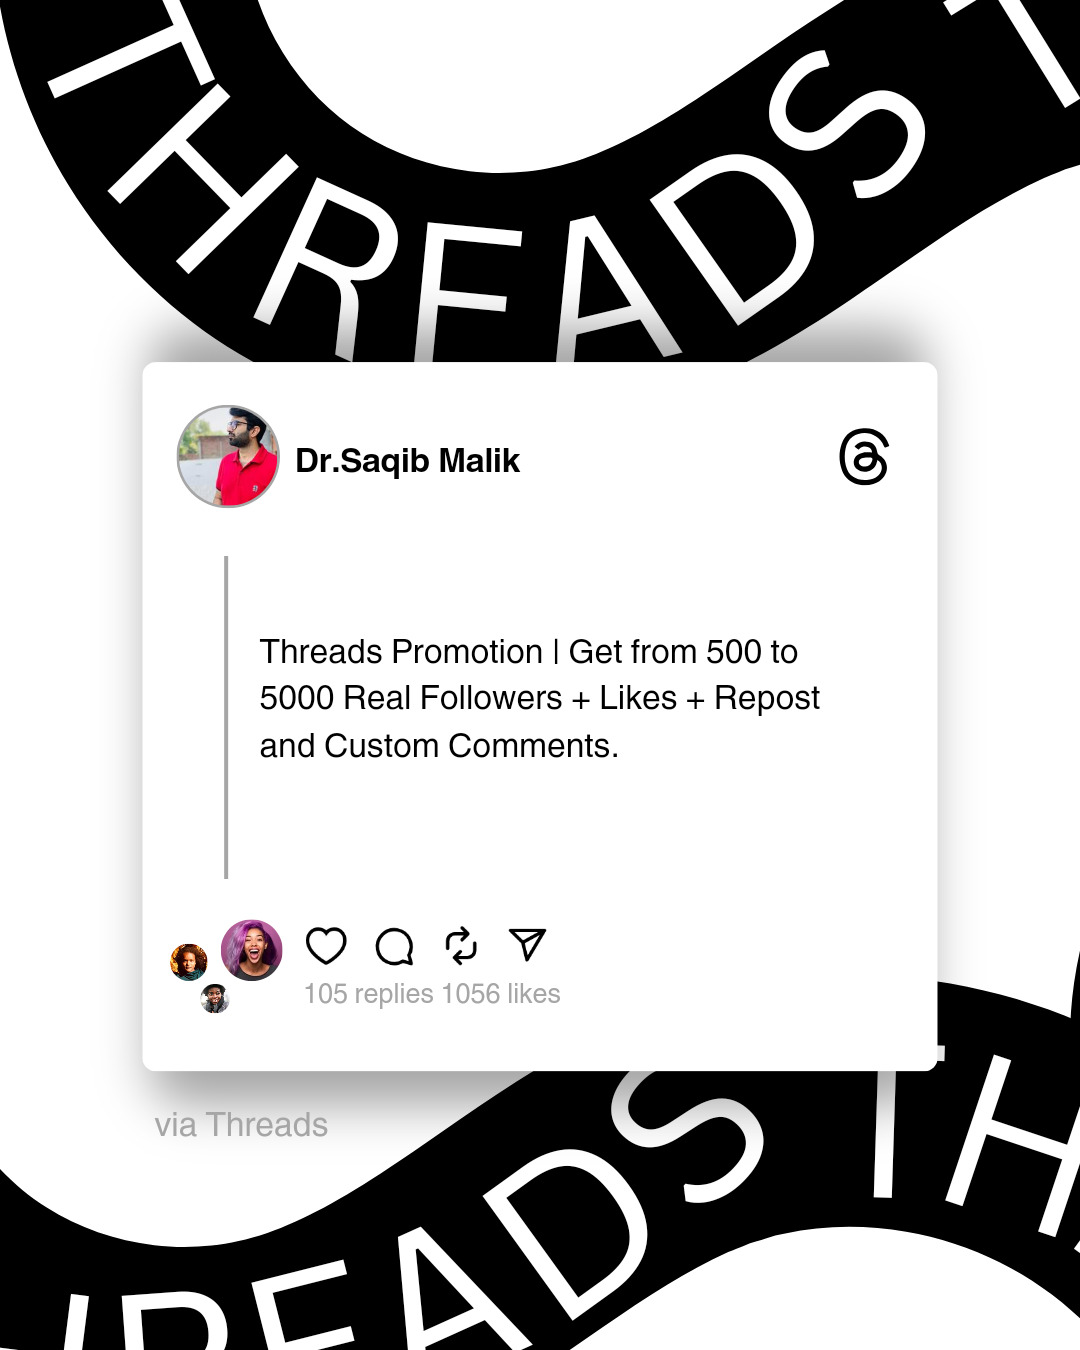 Threads Promotion | Get from 500 to 5000 Real Followers + Likes+Reposts and Comments